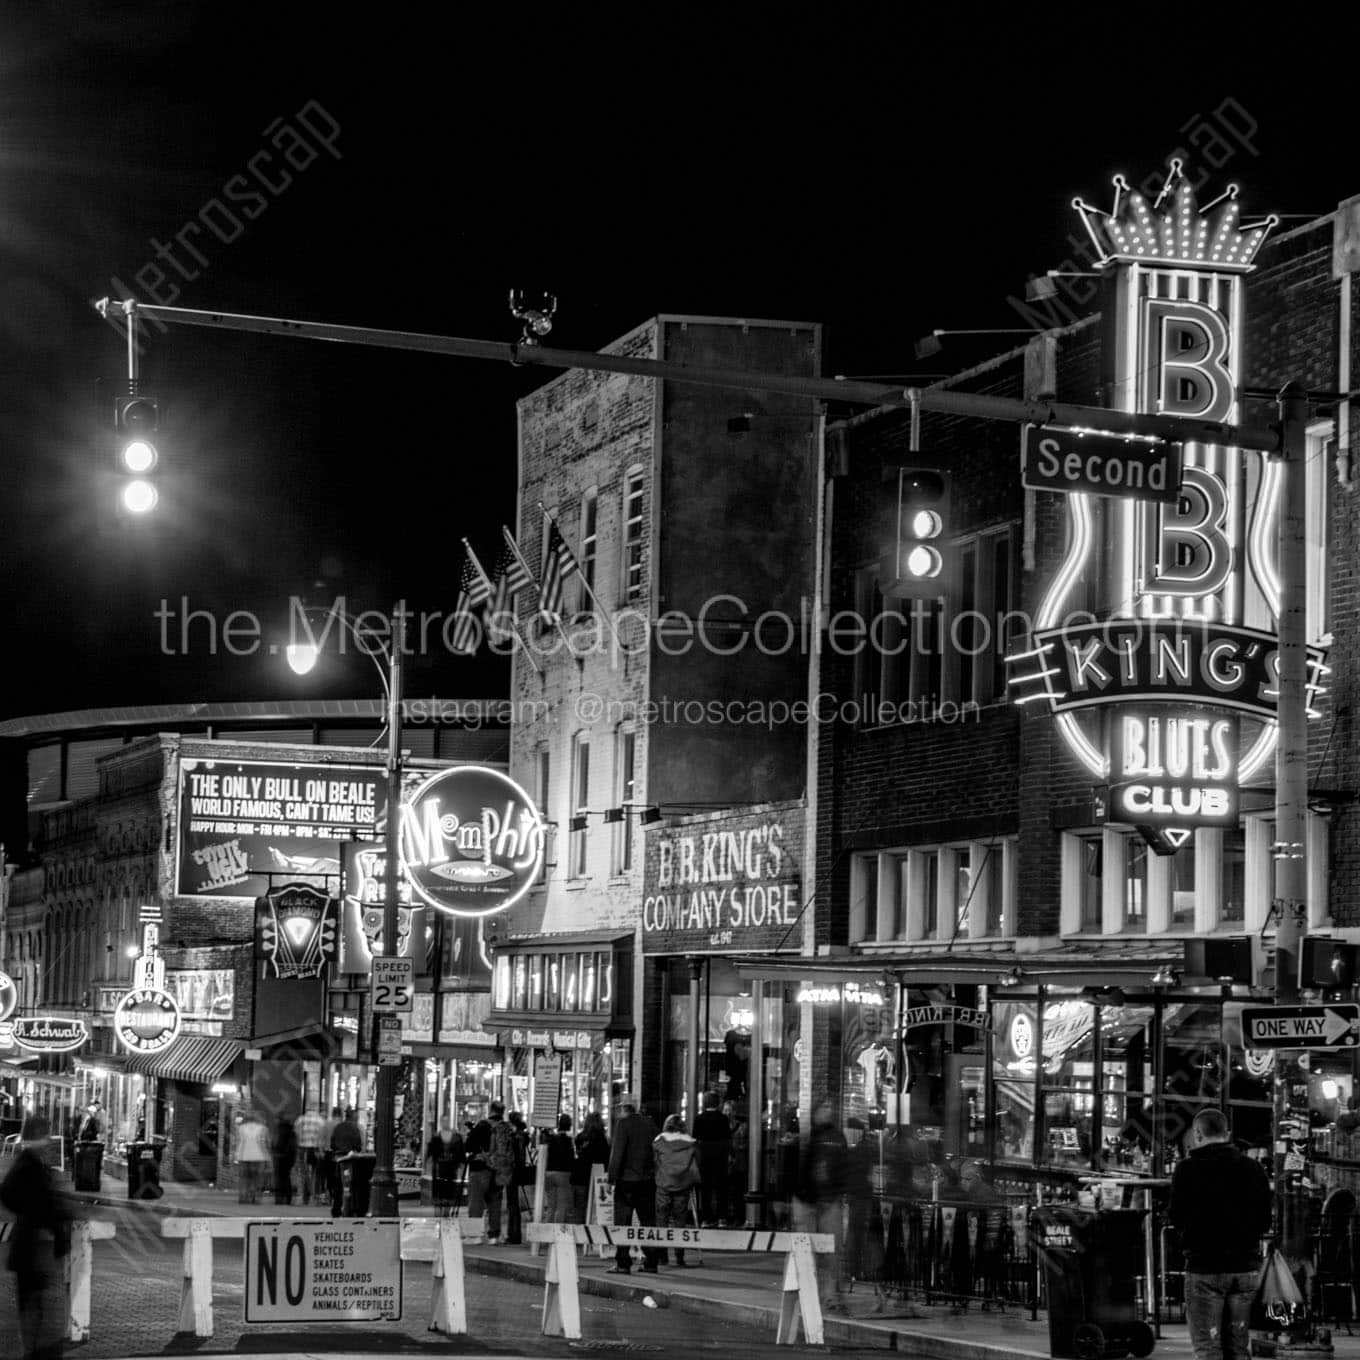 second and beale street at night Black & White Wall Art